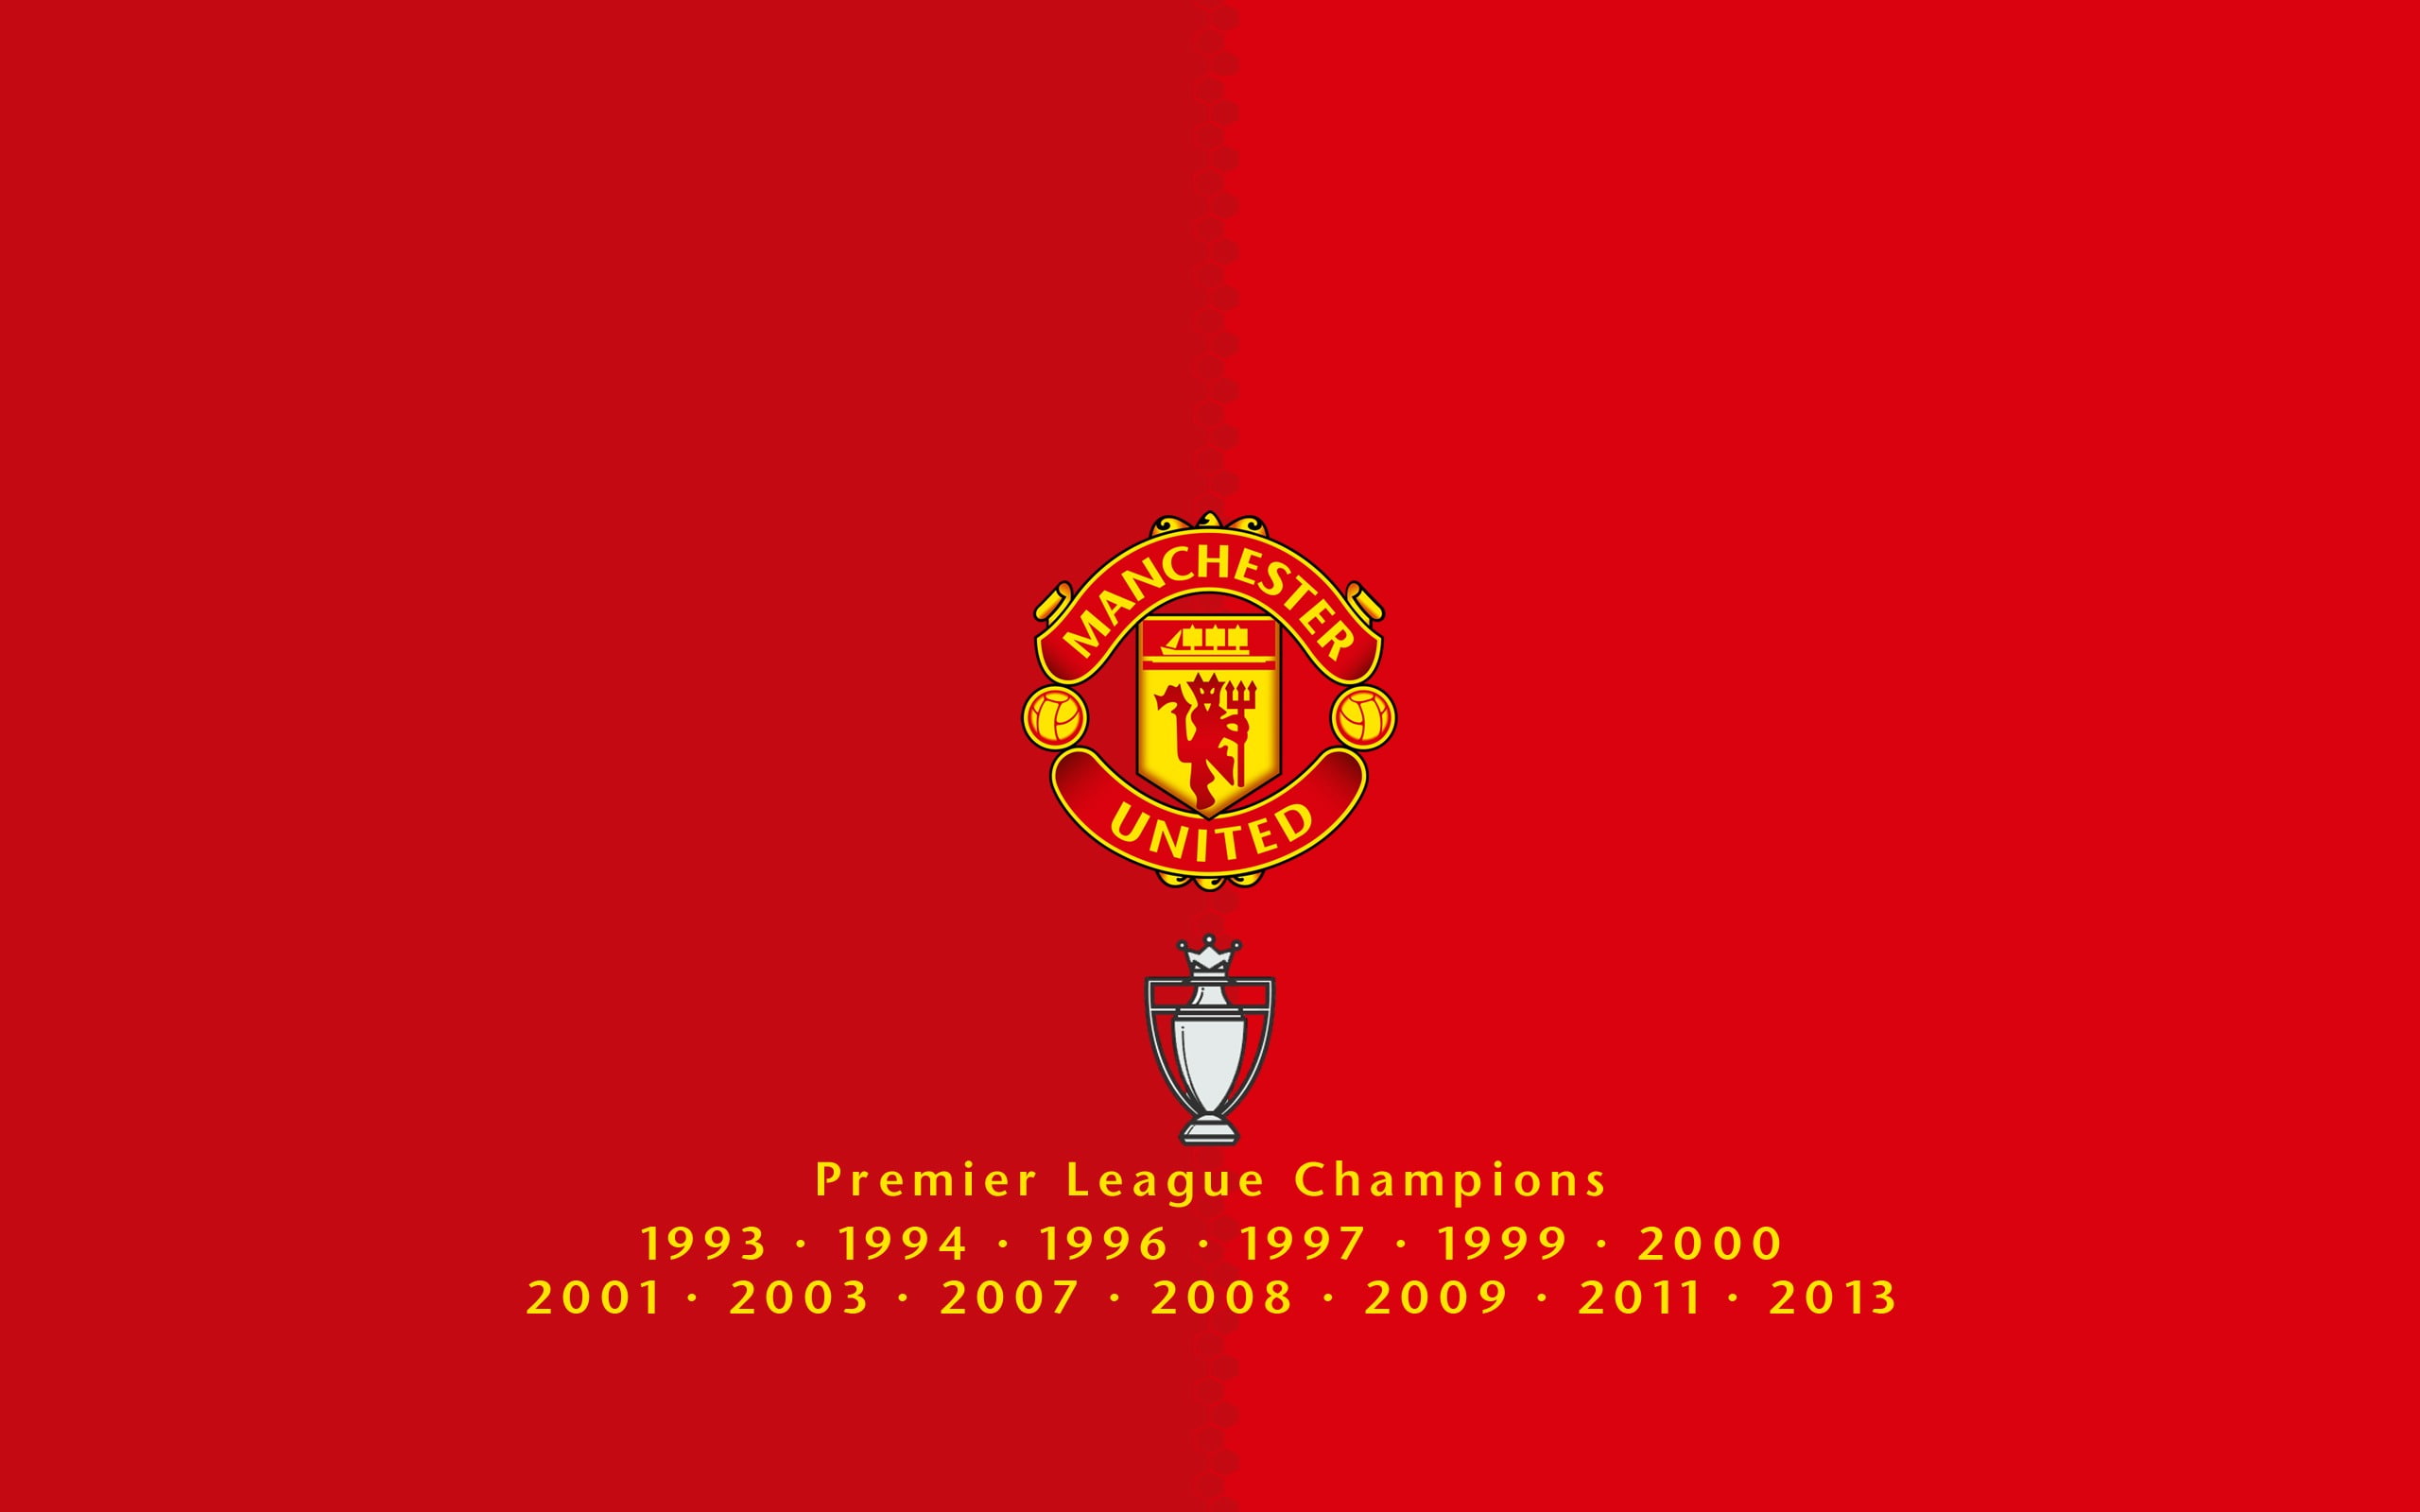 Manchester United Champions-European Football Club.., red, text